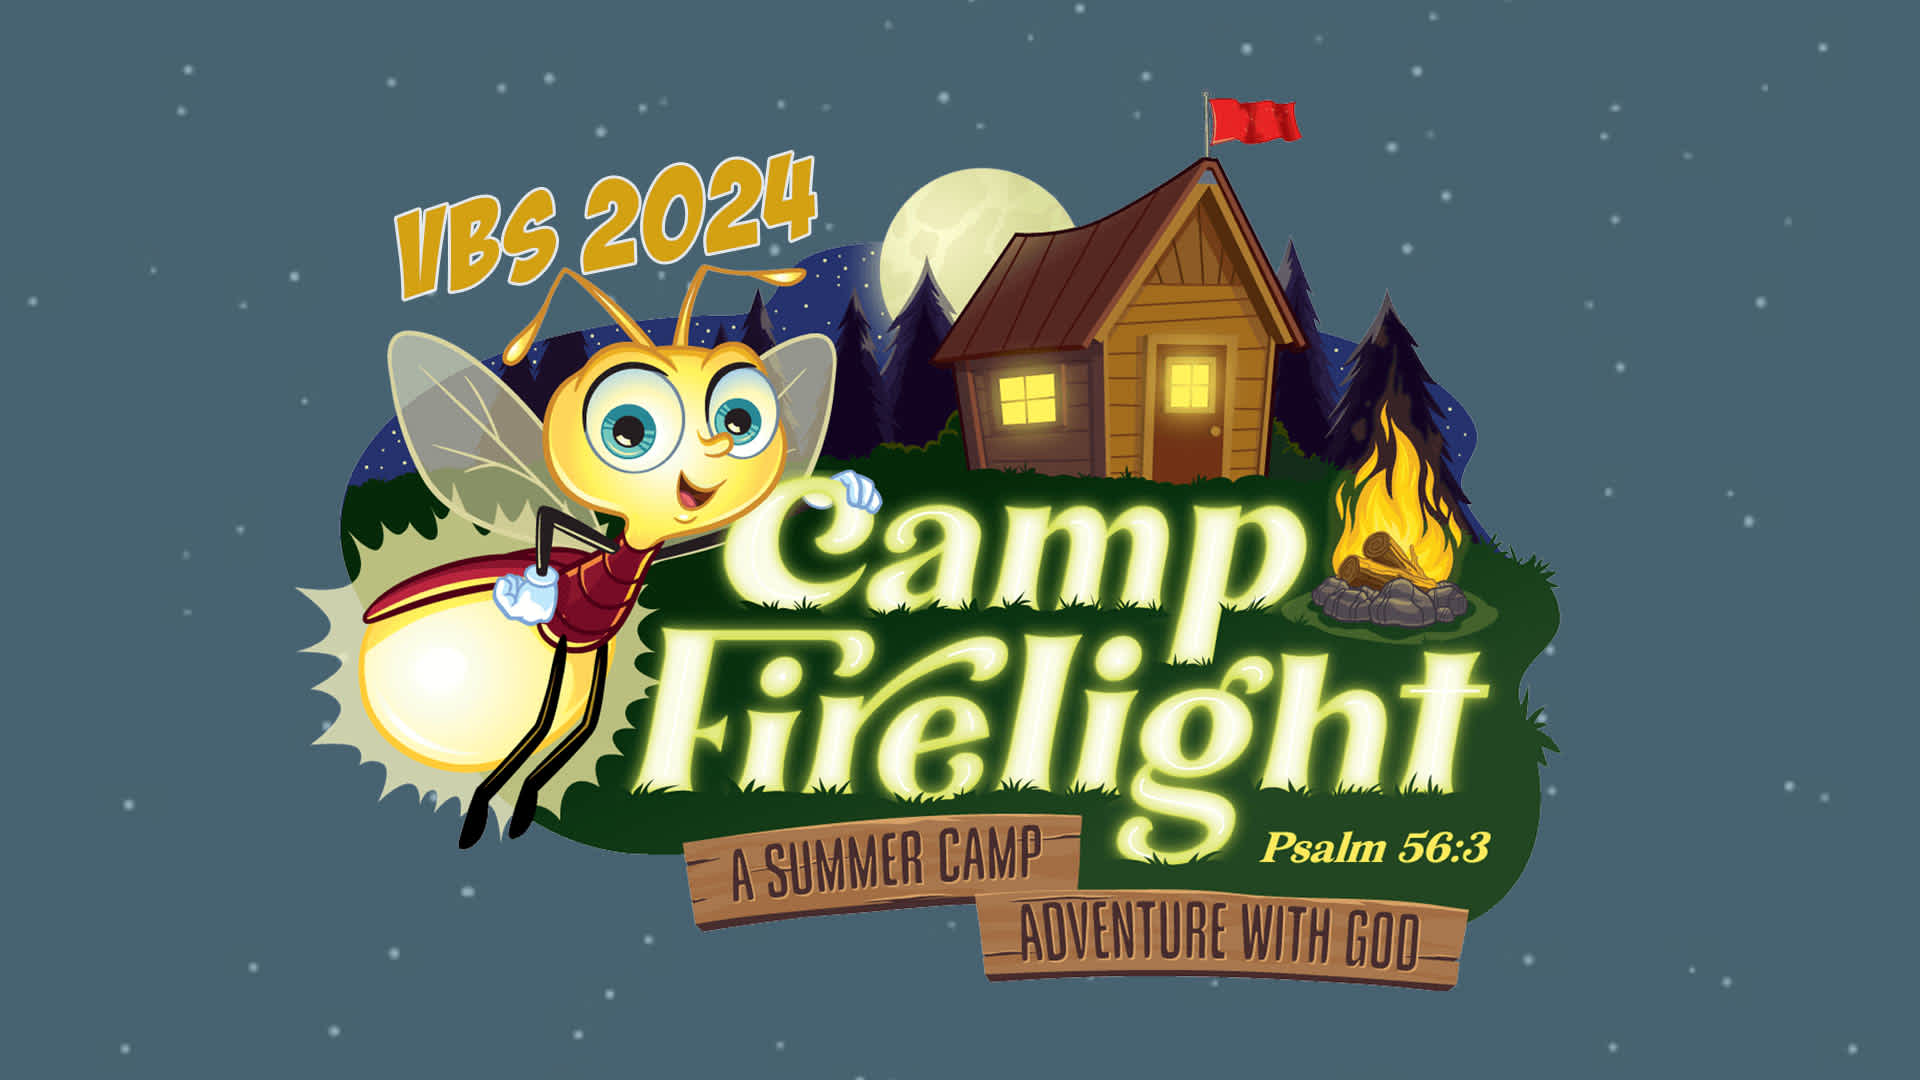 Vacation Bible School ages 4-12 years